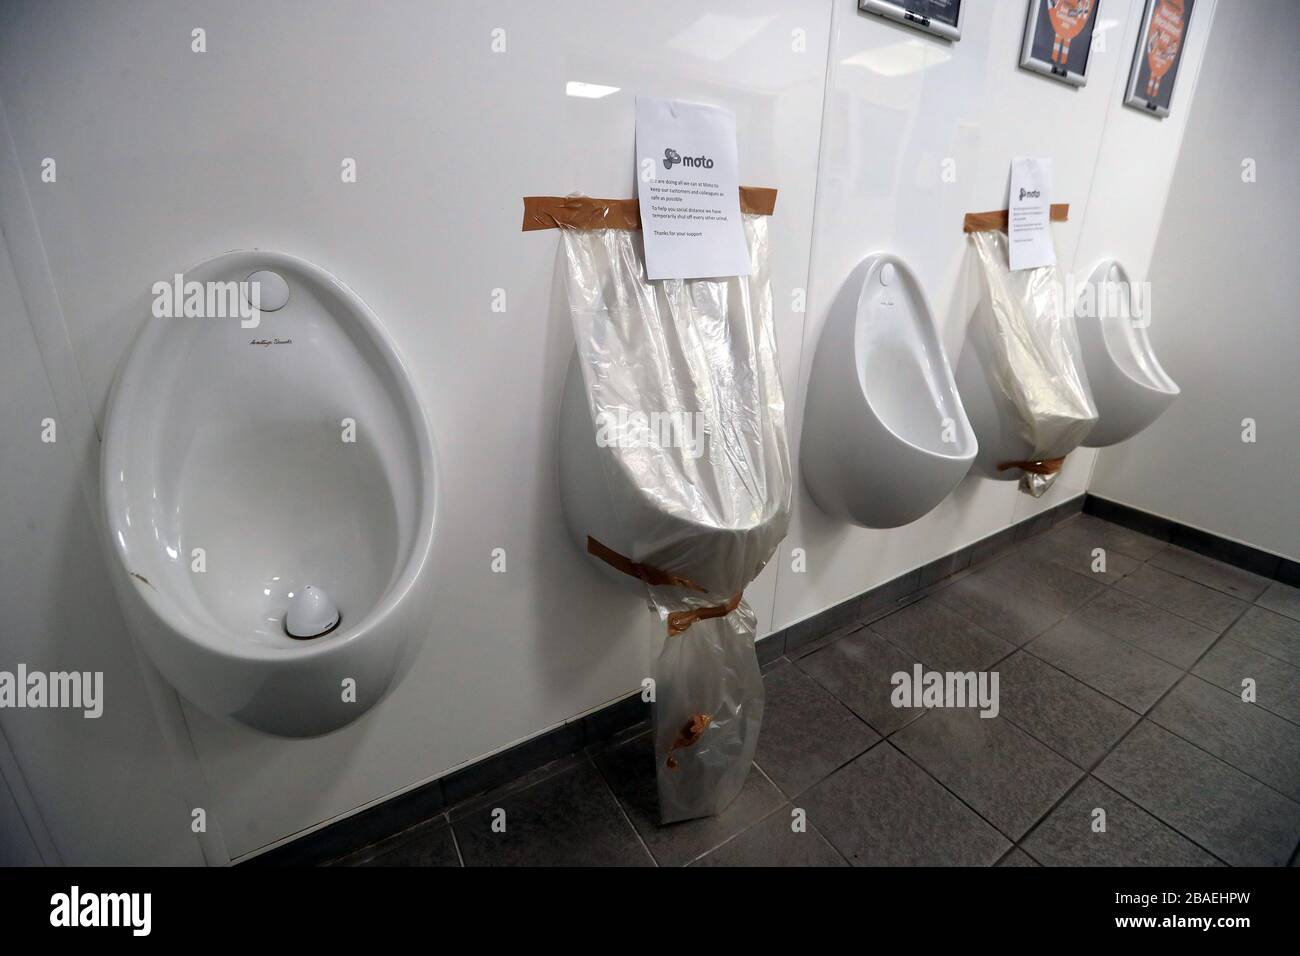 Signs on urinals at Moto services in Melton Mowbray as the UK continues in lockdown to help curb the spread of the coronavirus. Stock Photo